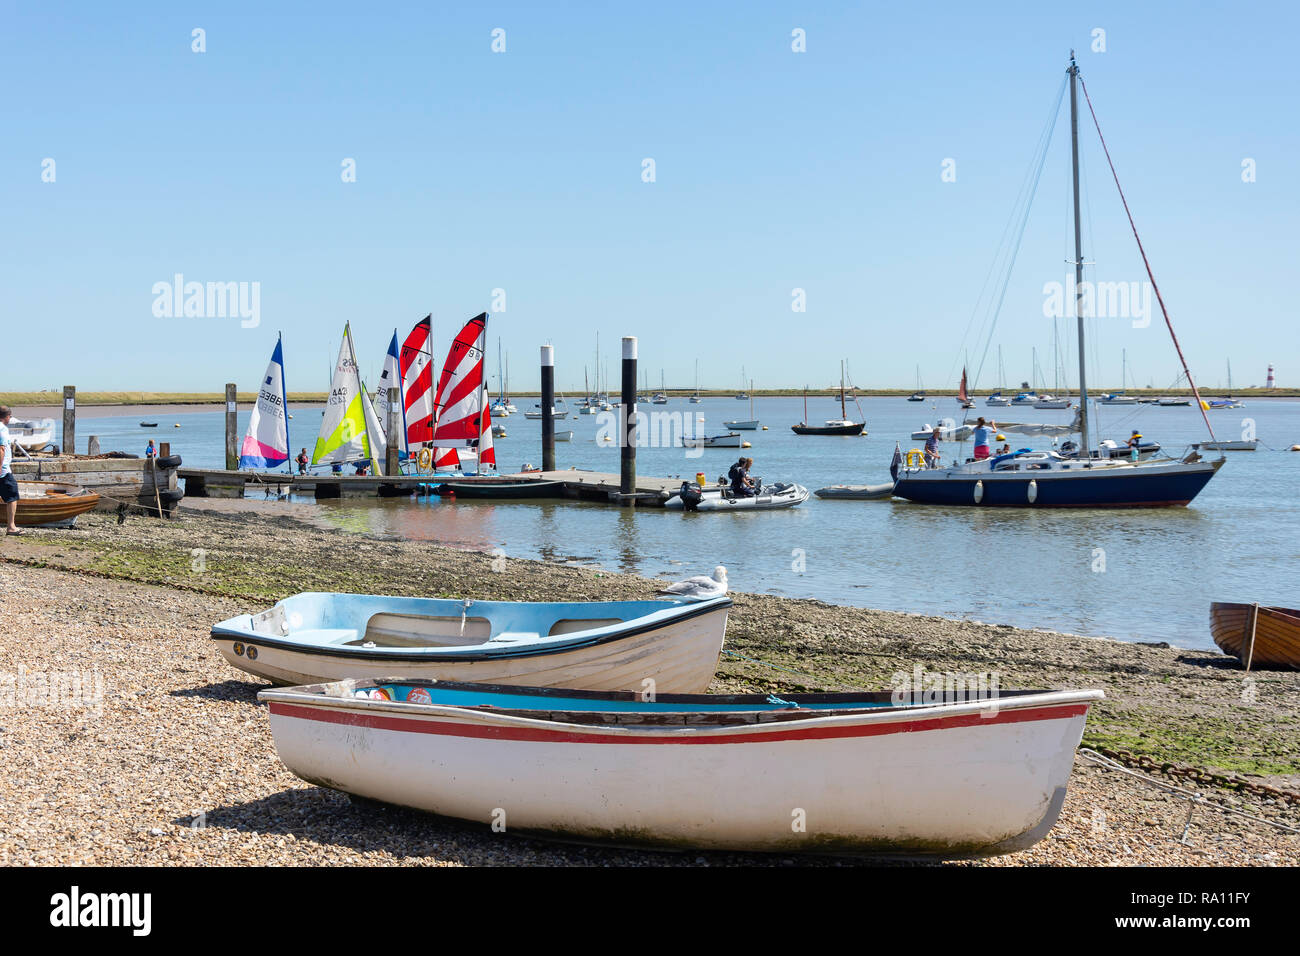 Beach and jetty on Orford Quay, Orford, Suffolk, England, United Kingdom Stock Photo